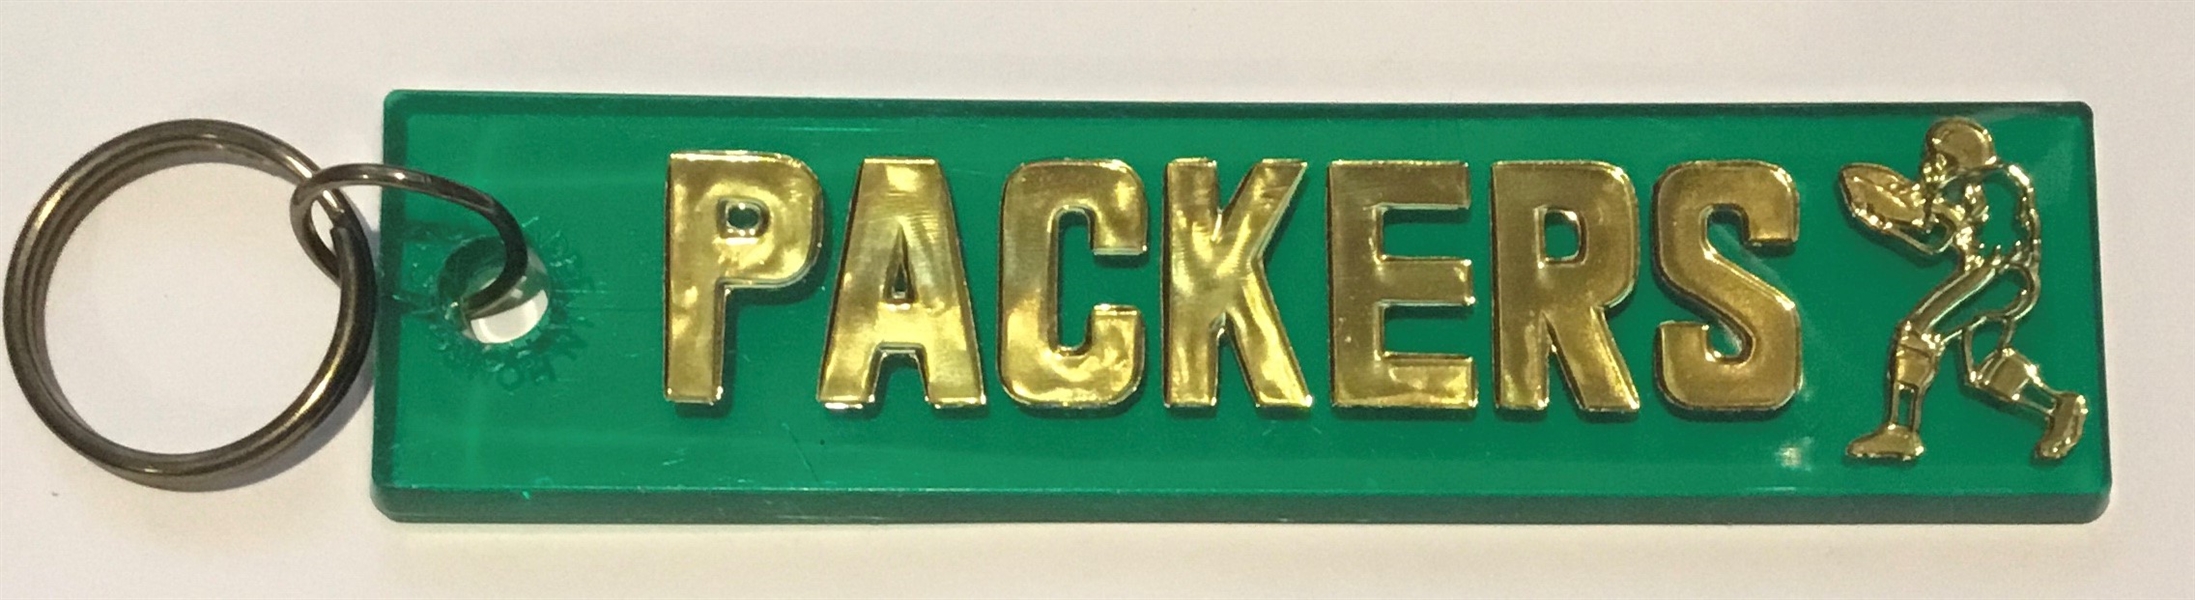 VINTAGE GREEN BAY PACKERS KEY CHAIN- MUST SEE!